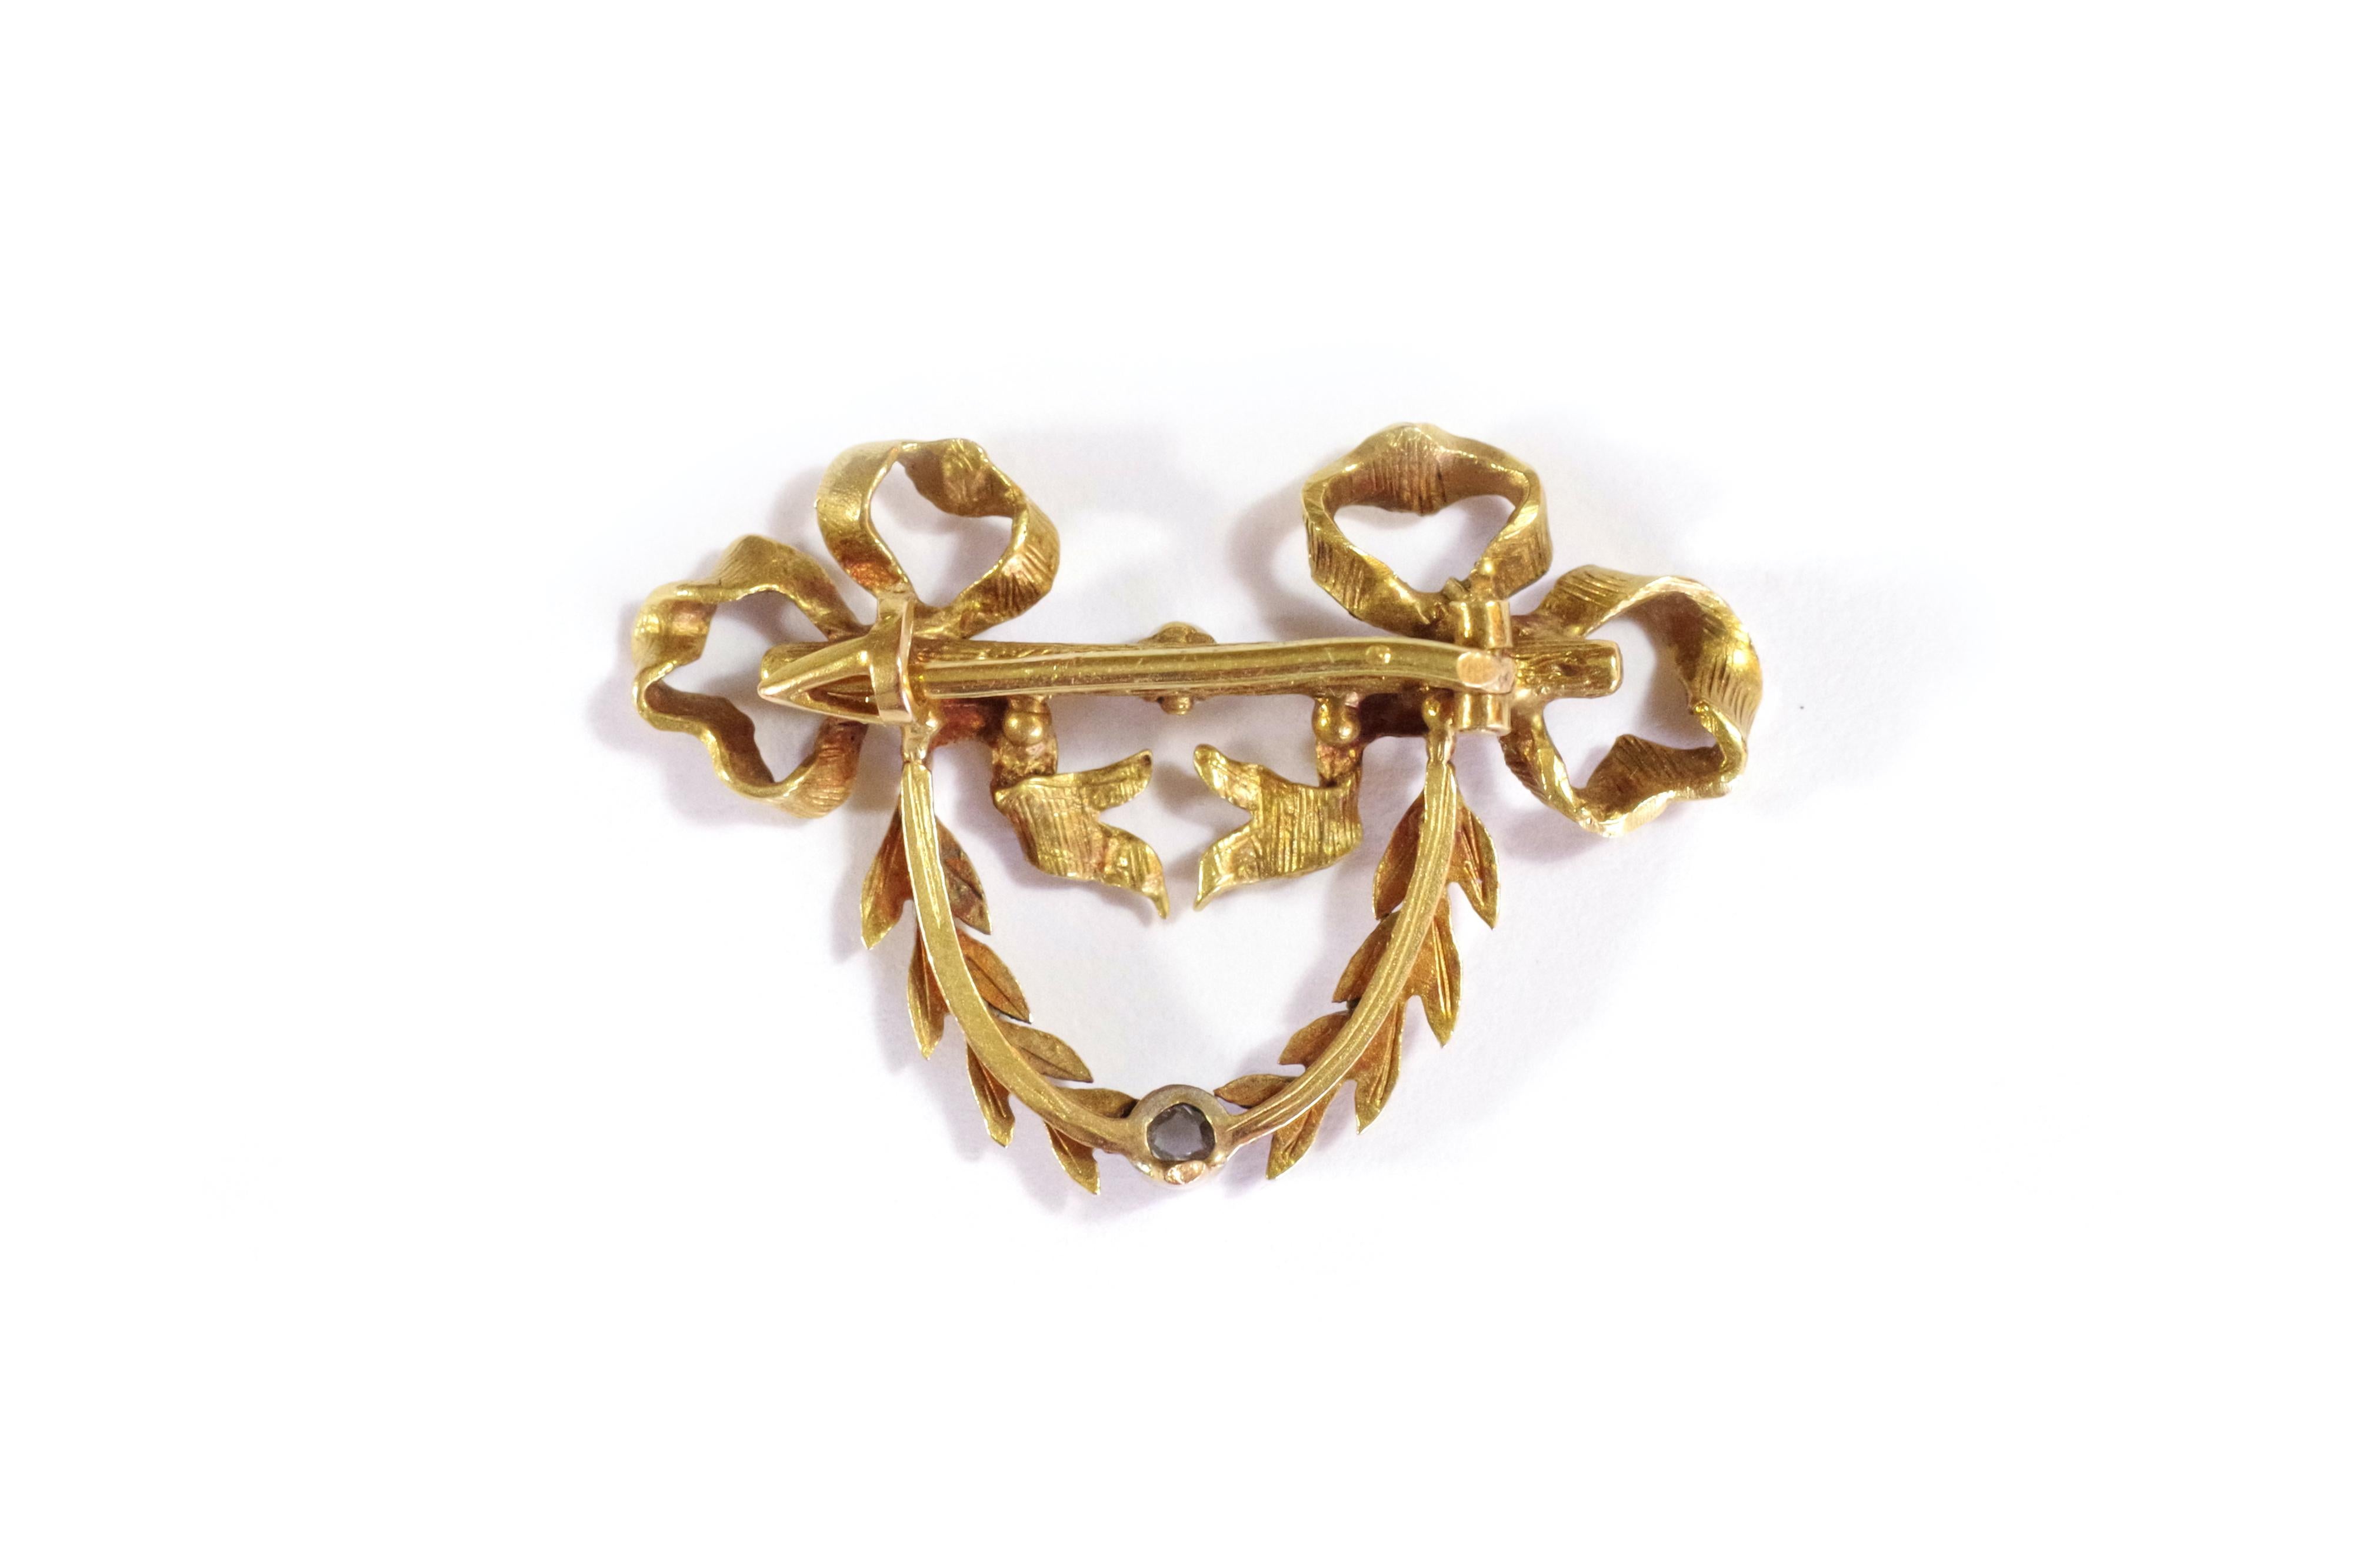 French Victorian garland brooch in gold 18 karat. Brooch decorated with ribbon bows and branches hanging on a straight branch. In the center of this one, a pearl. Below the brooch, in a white gold pearl setting, a rose-cut diamond. Antique brooch